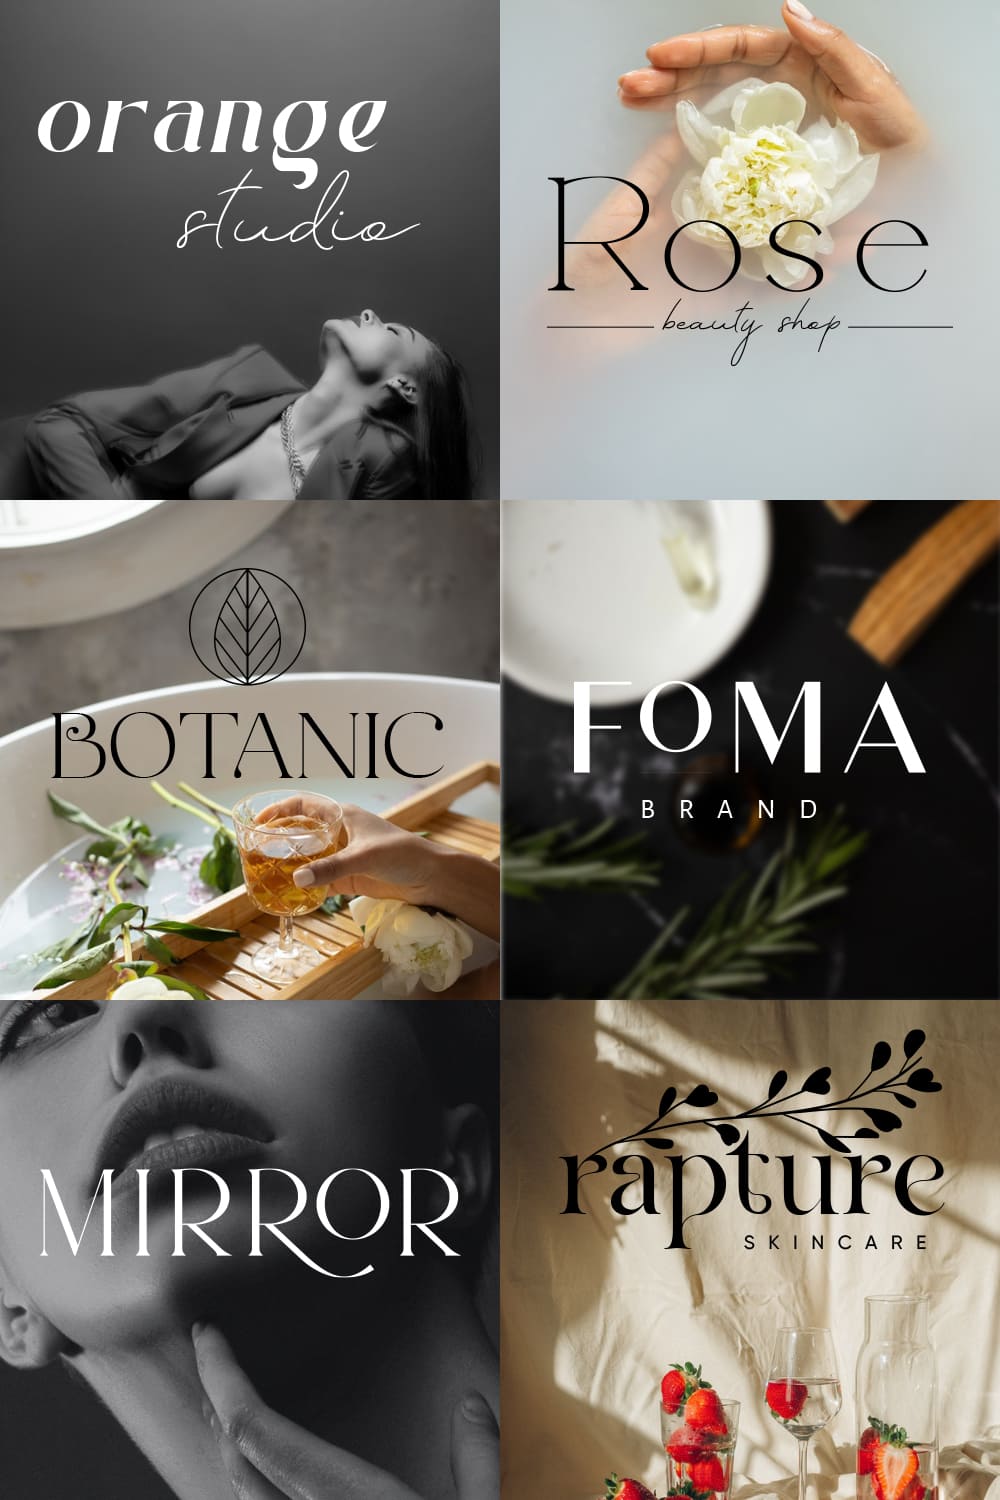 Aesthetic logos in a delicate style.